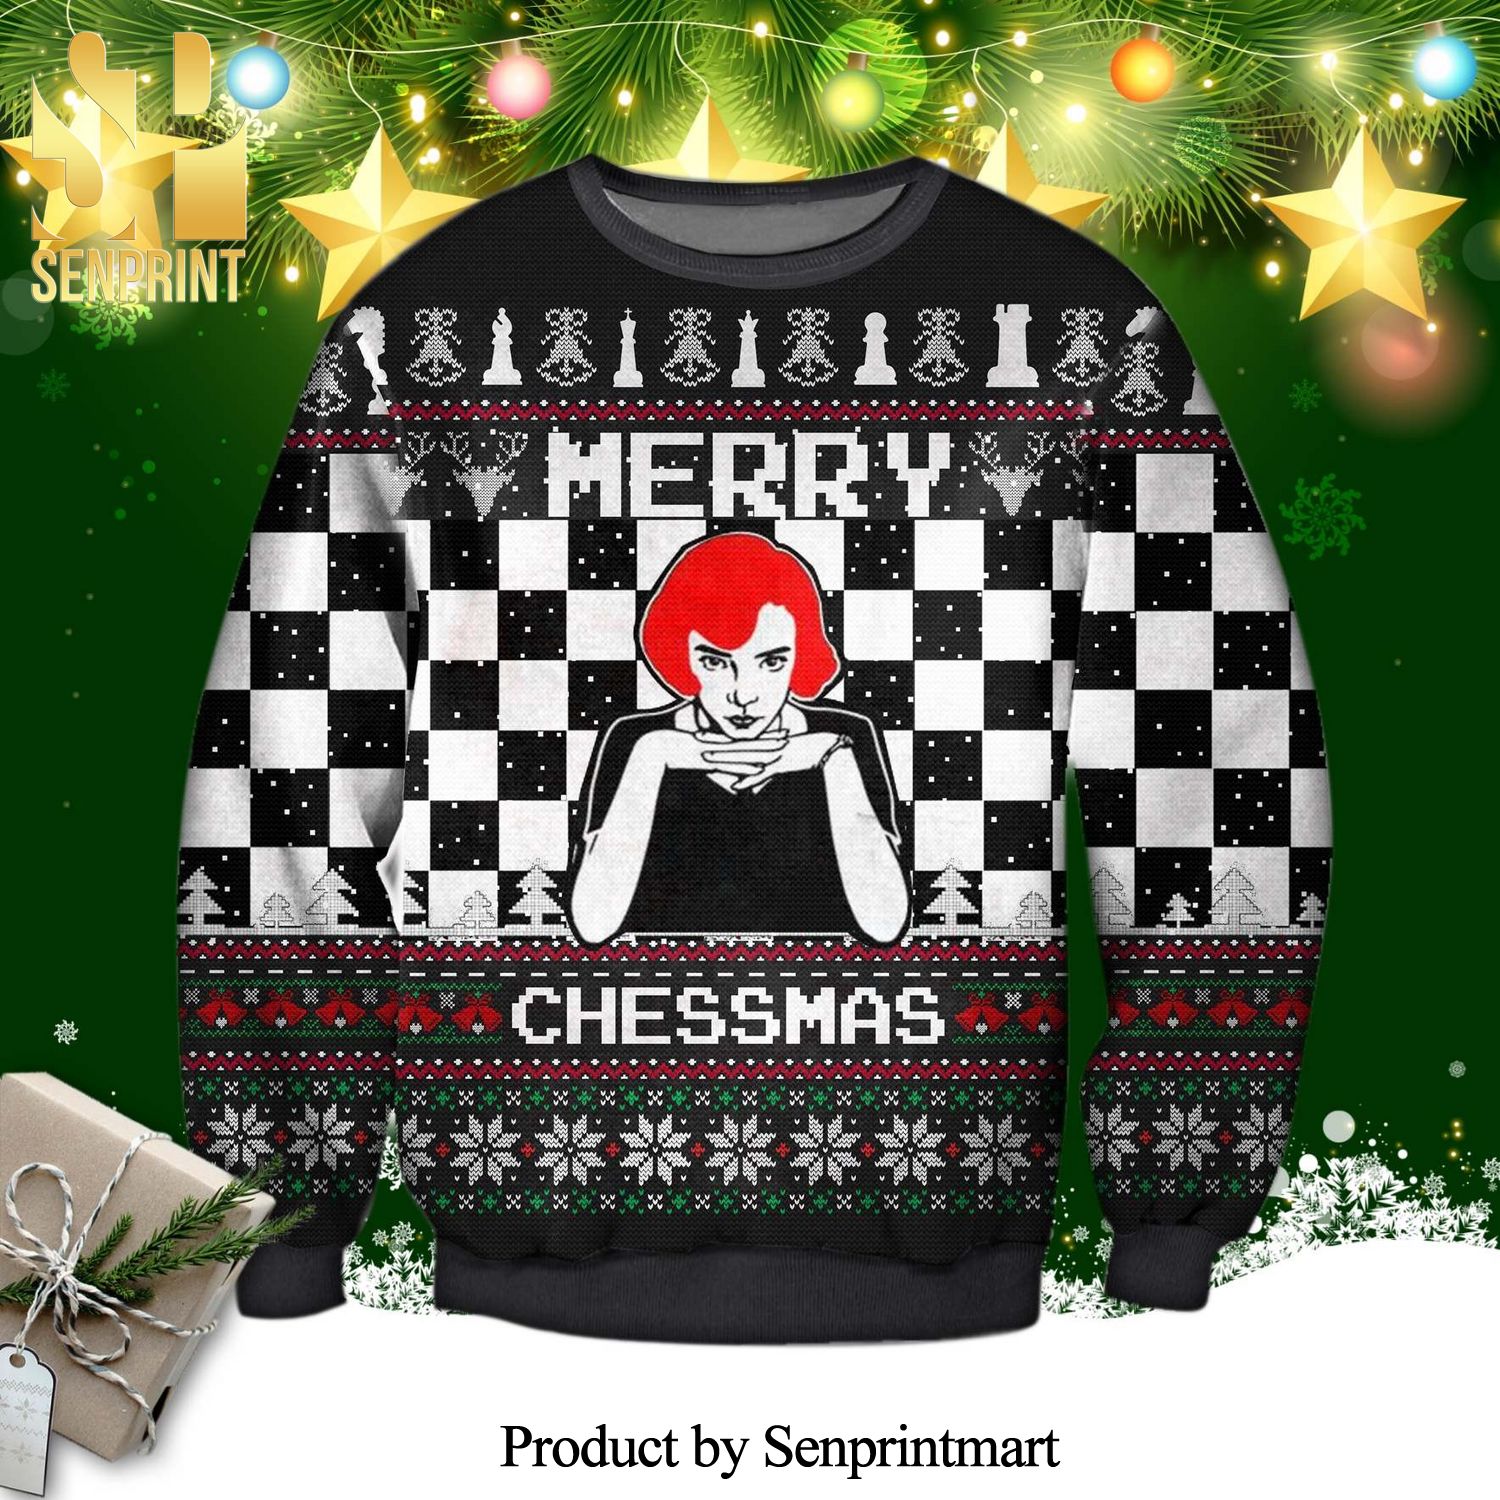 Anya Taylor-Joy The Queen’s Gambit Merry Chessmas Knitted Ugly Christmas Sweater